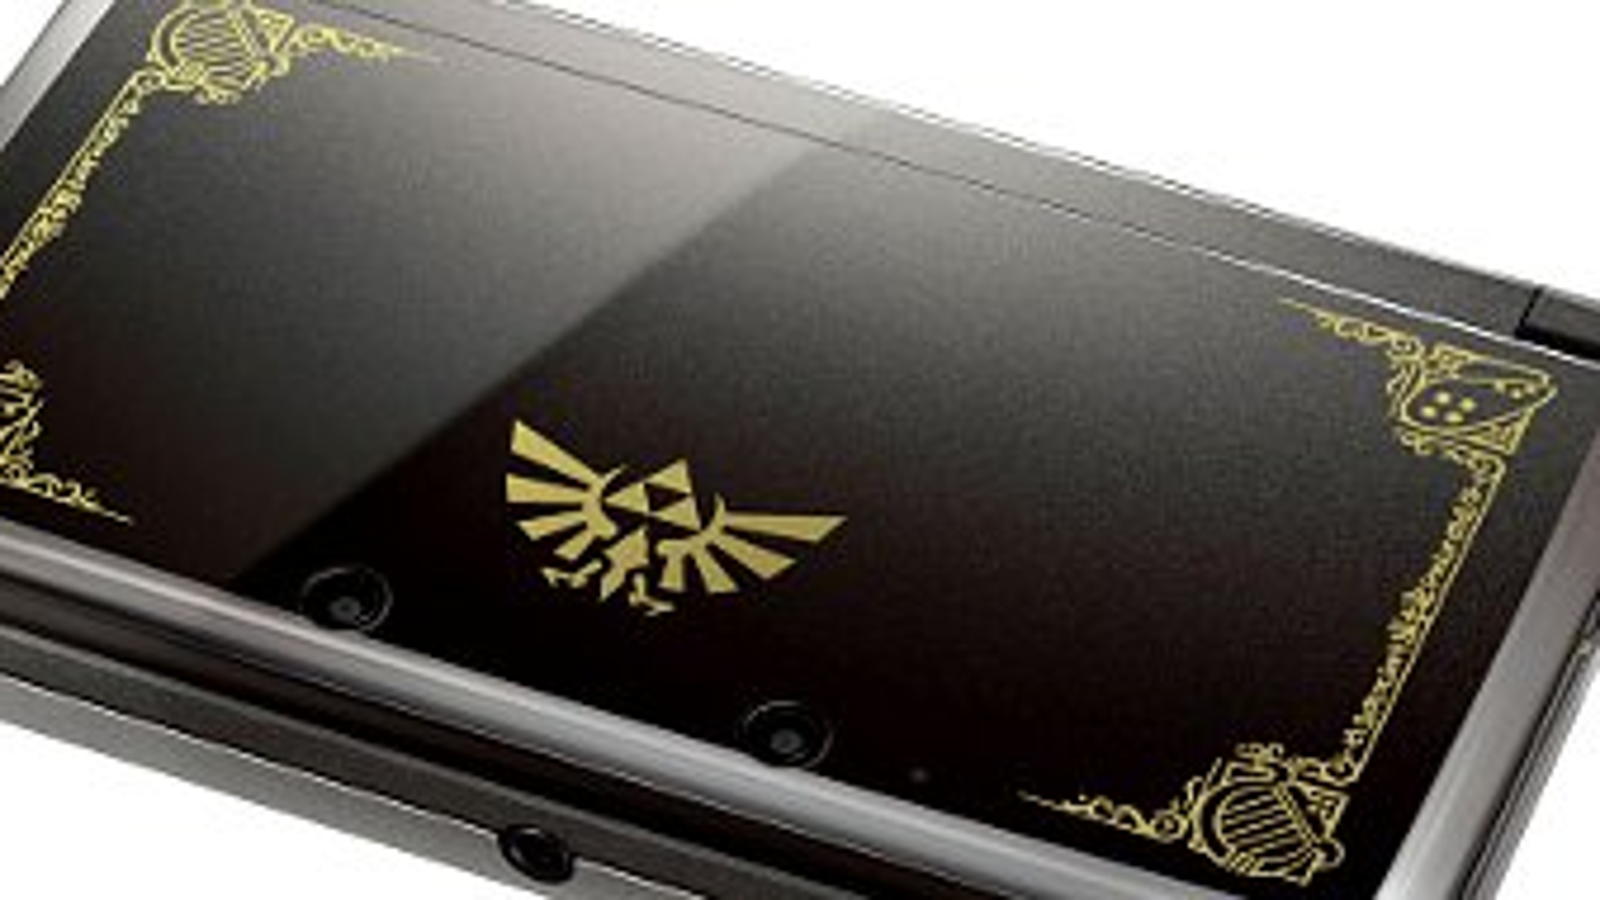 The Legend of Zelda 25th Anniversary Limited Edition is heading to